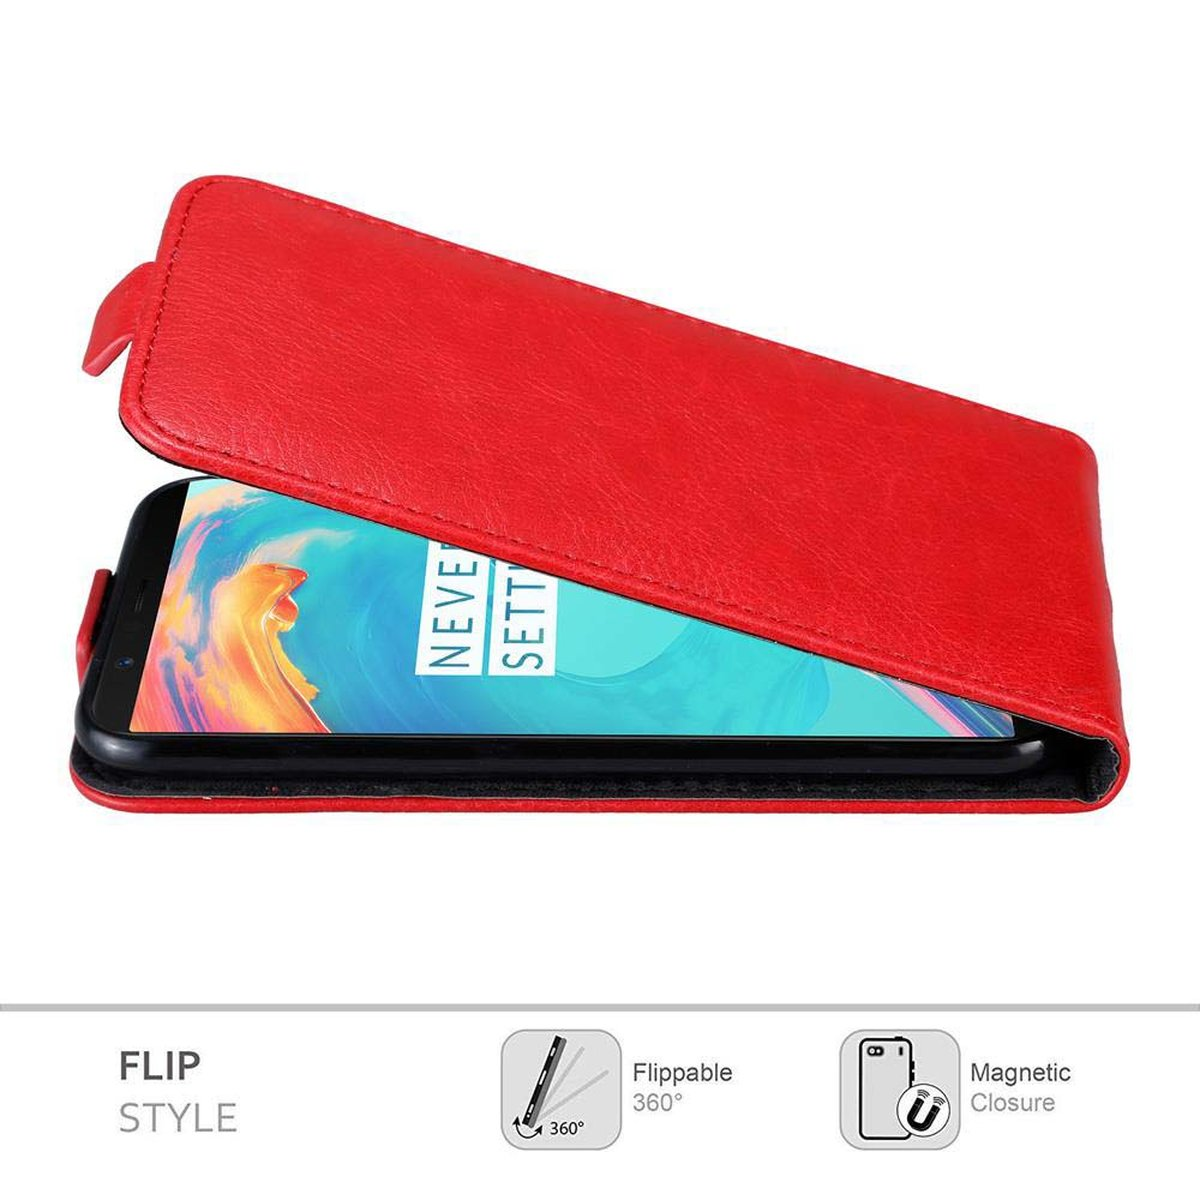 Flip APFEL 5T, CADORABO OnePlus, Hülle Flip ROT Cover, Style, im